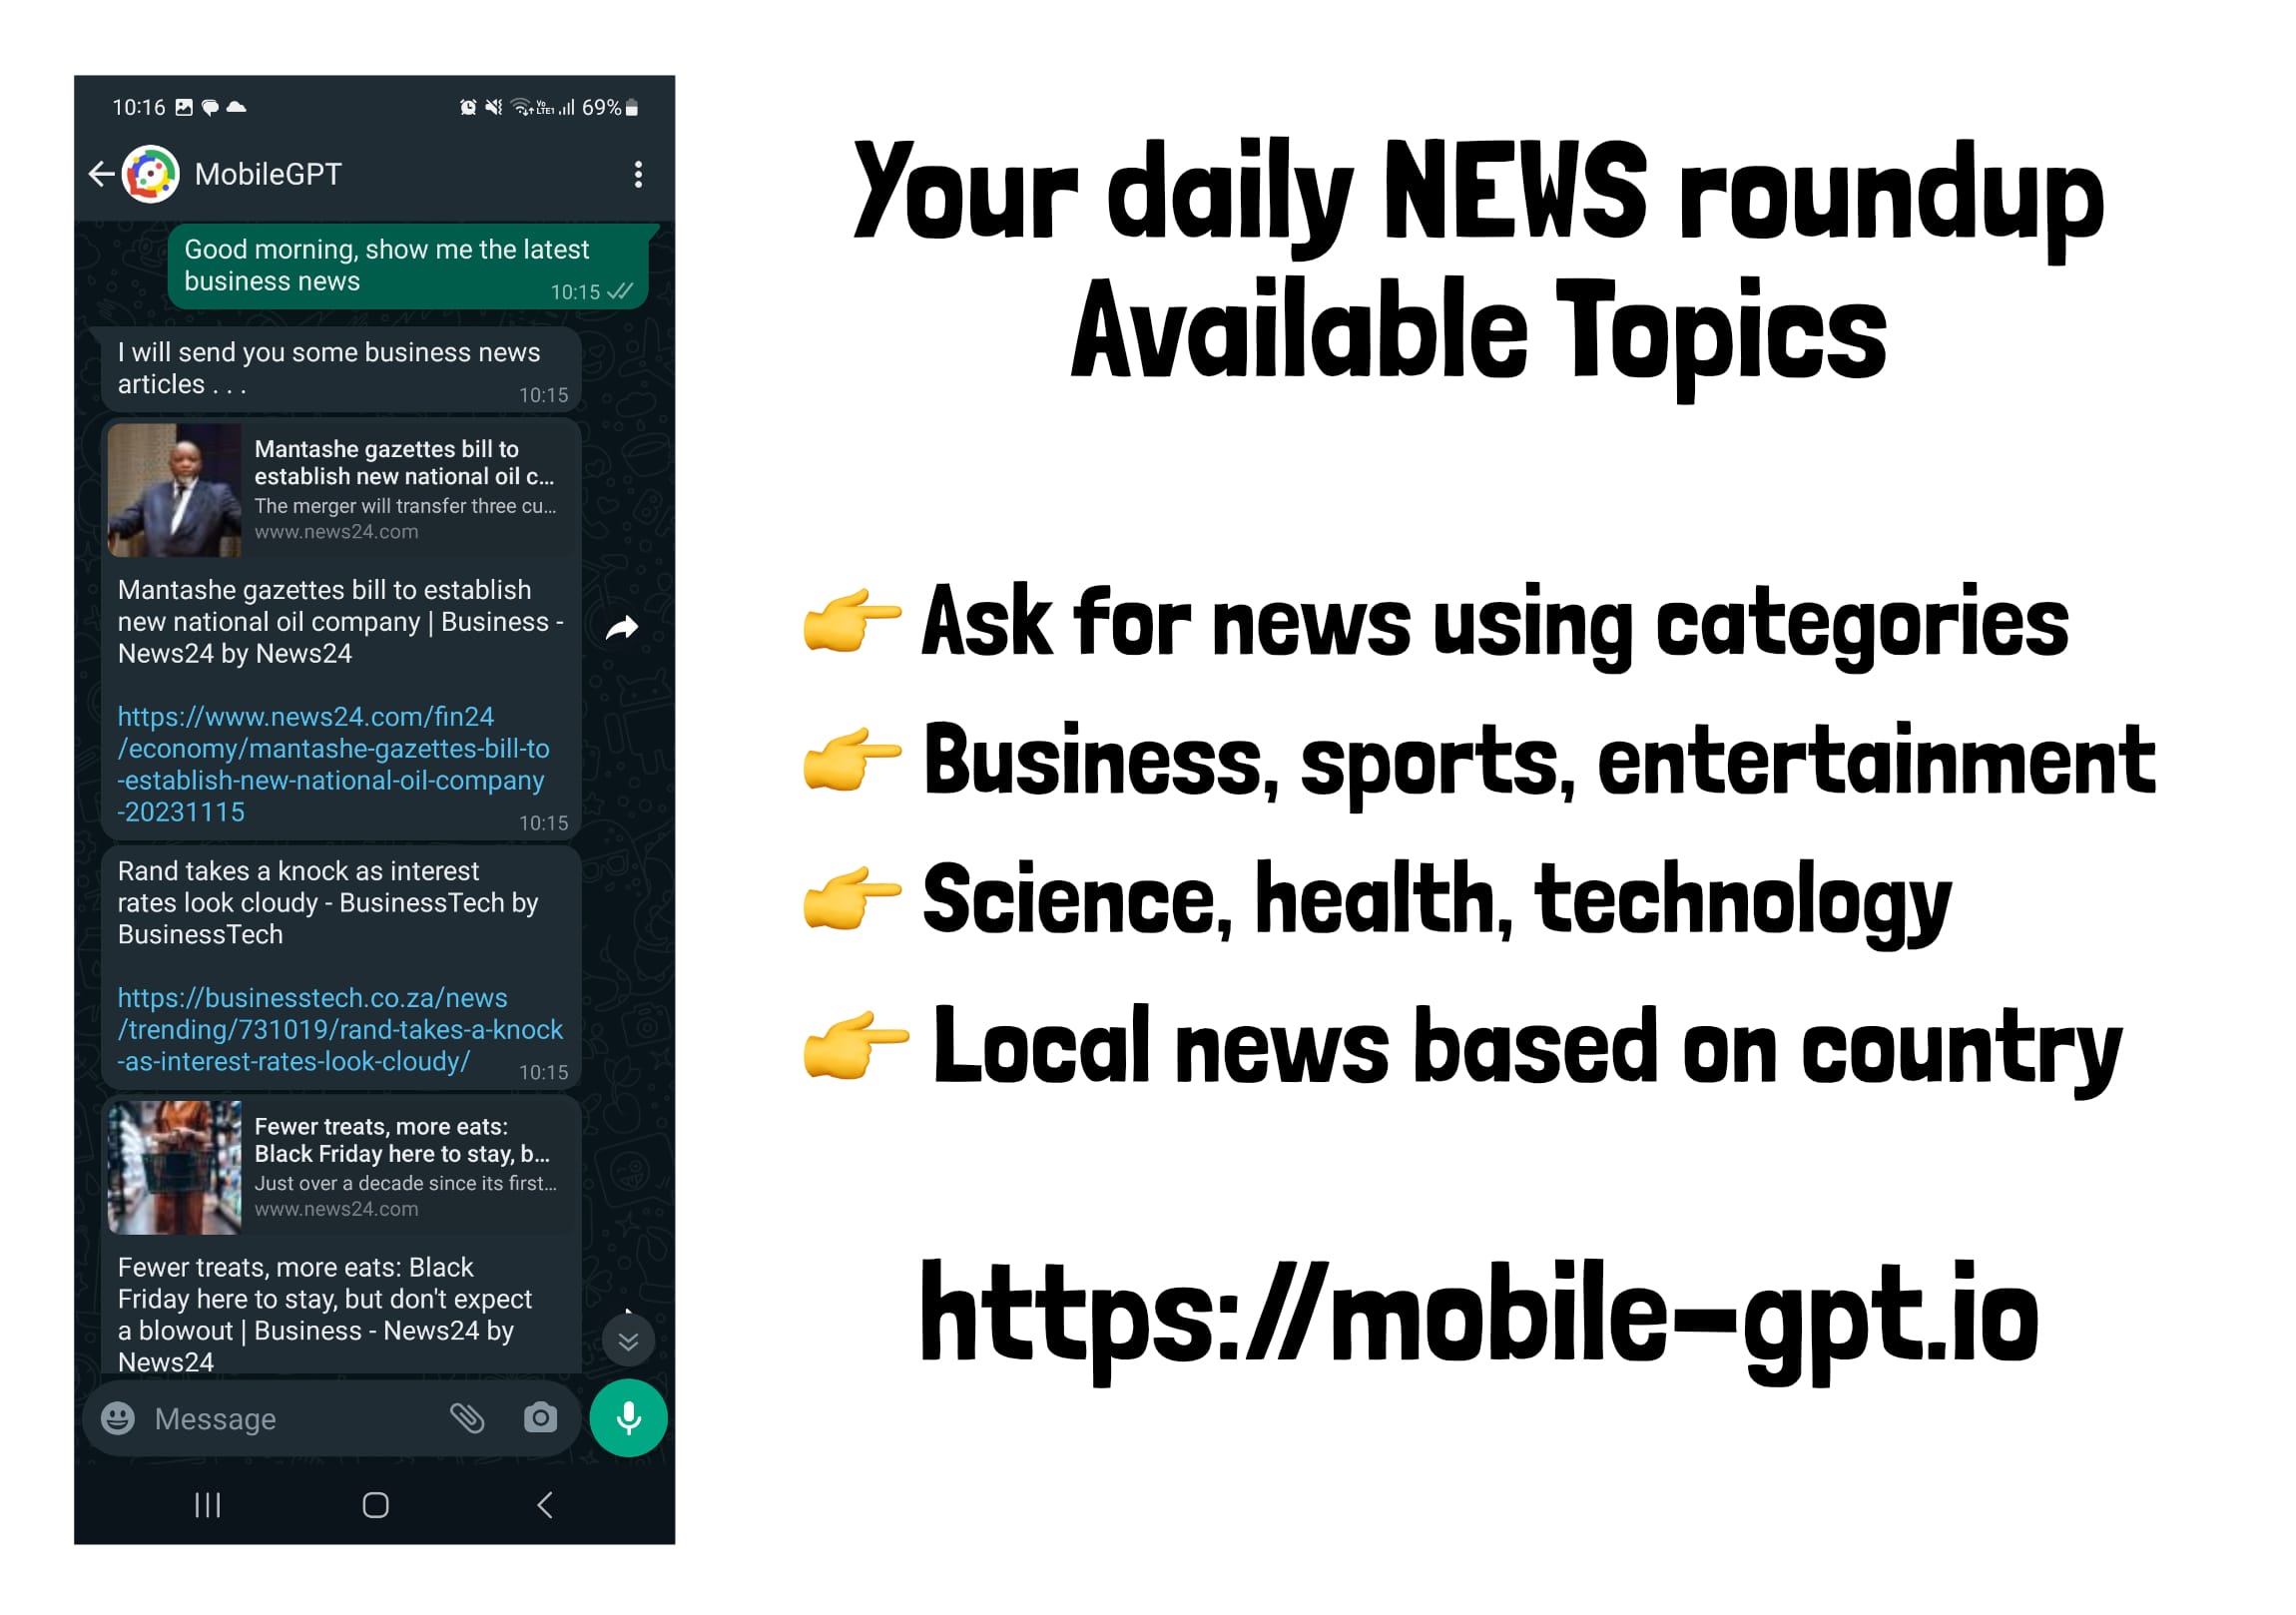 Search for news with WhatsApp